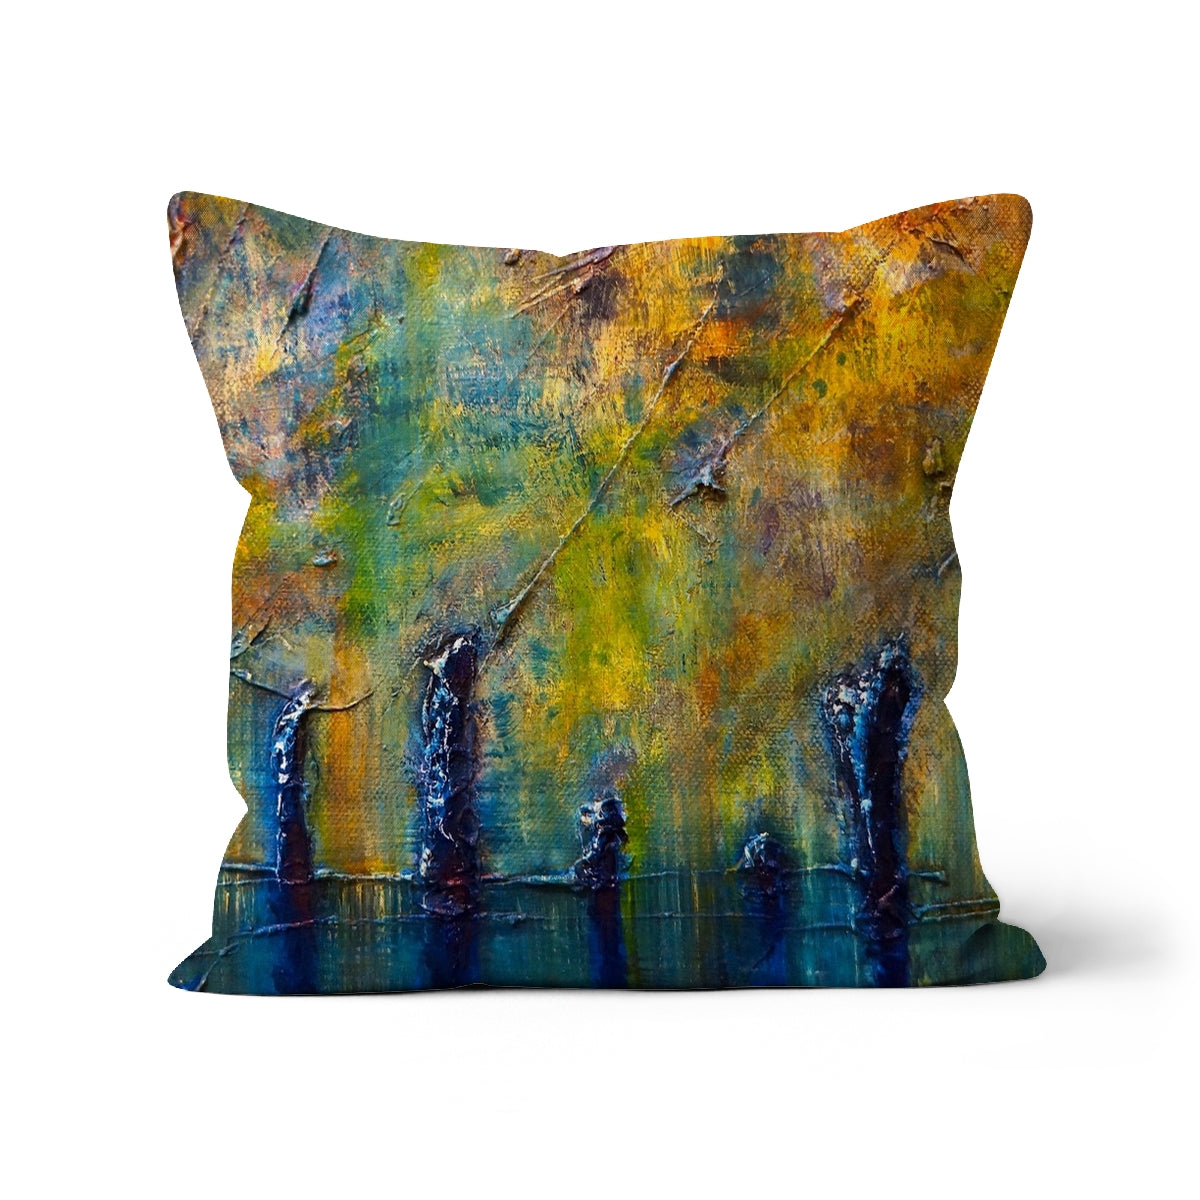 Stenness Moonlight Orkney Art Gifts Cushion-Cushions-Orkney Art Gallery-Linen-16"x16"-Paintings, Prints, Homeware, Art Gifts From Scotland By Scottish Artist Kevin Hunter